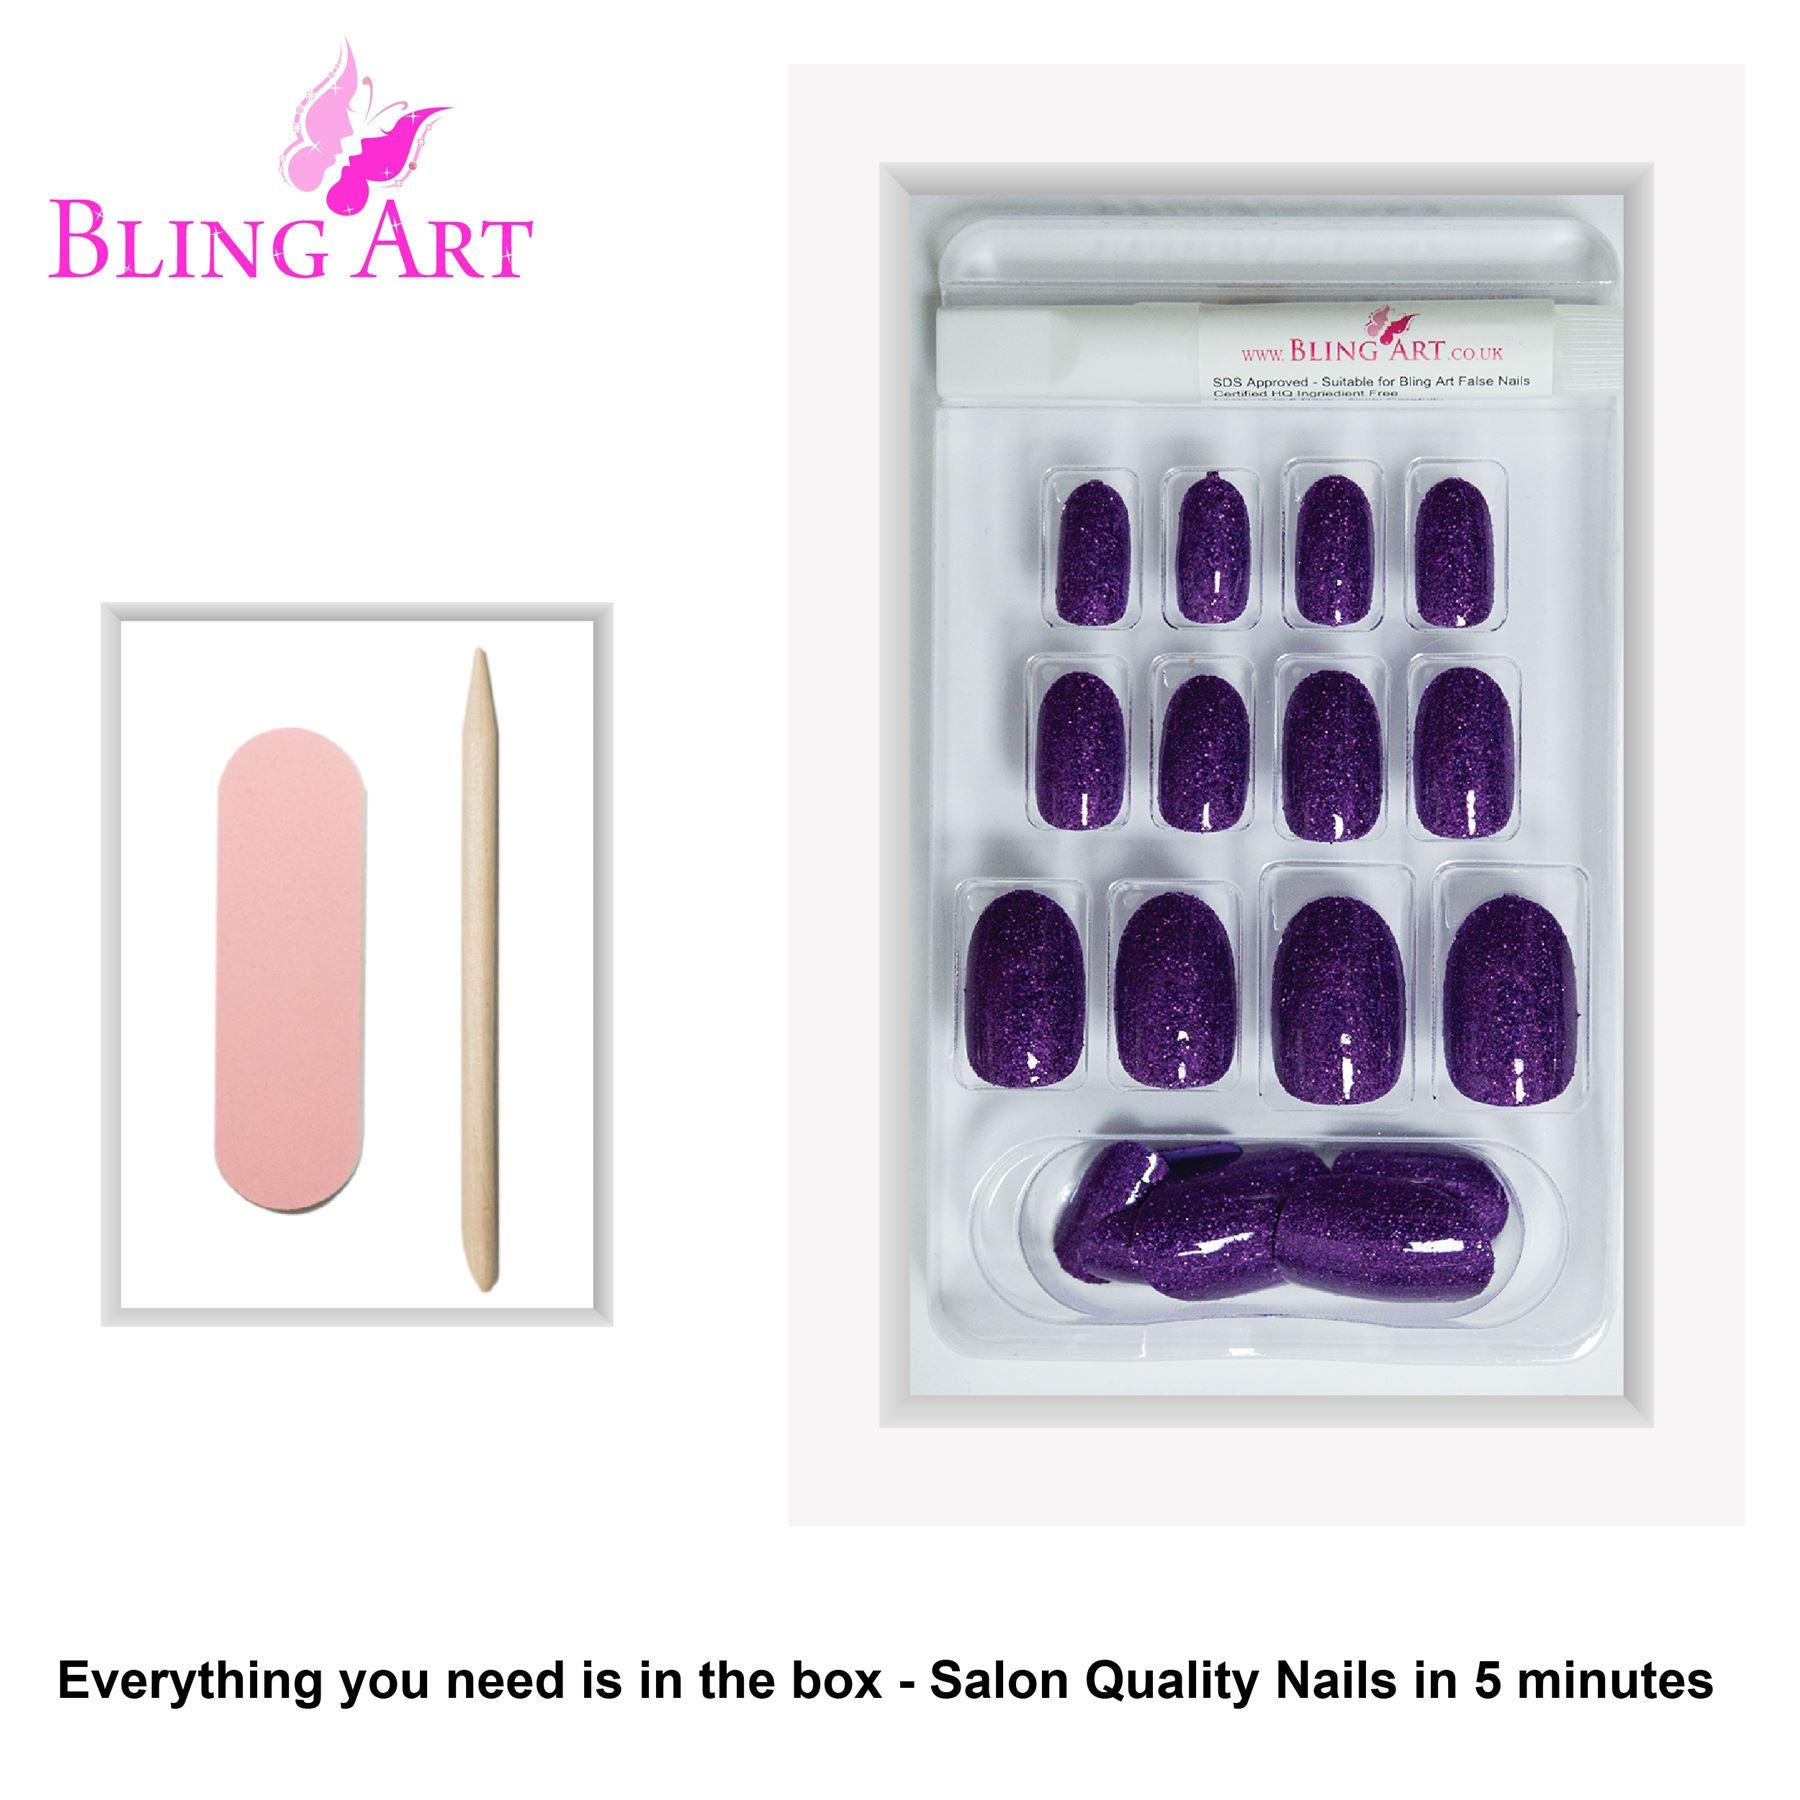 False Nails by Bling Art Purple Gel Oval Medium Fake Acrylic Round Nail Tips with Glue